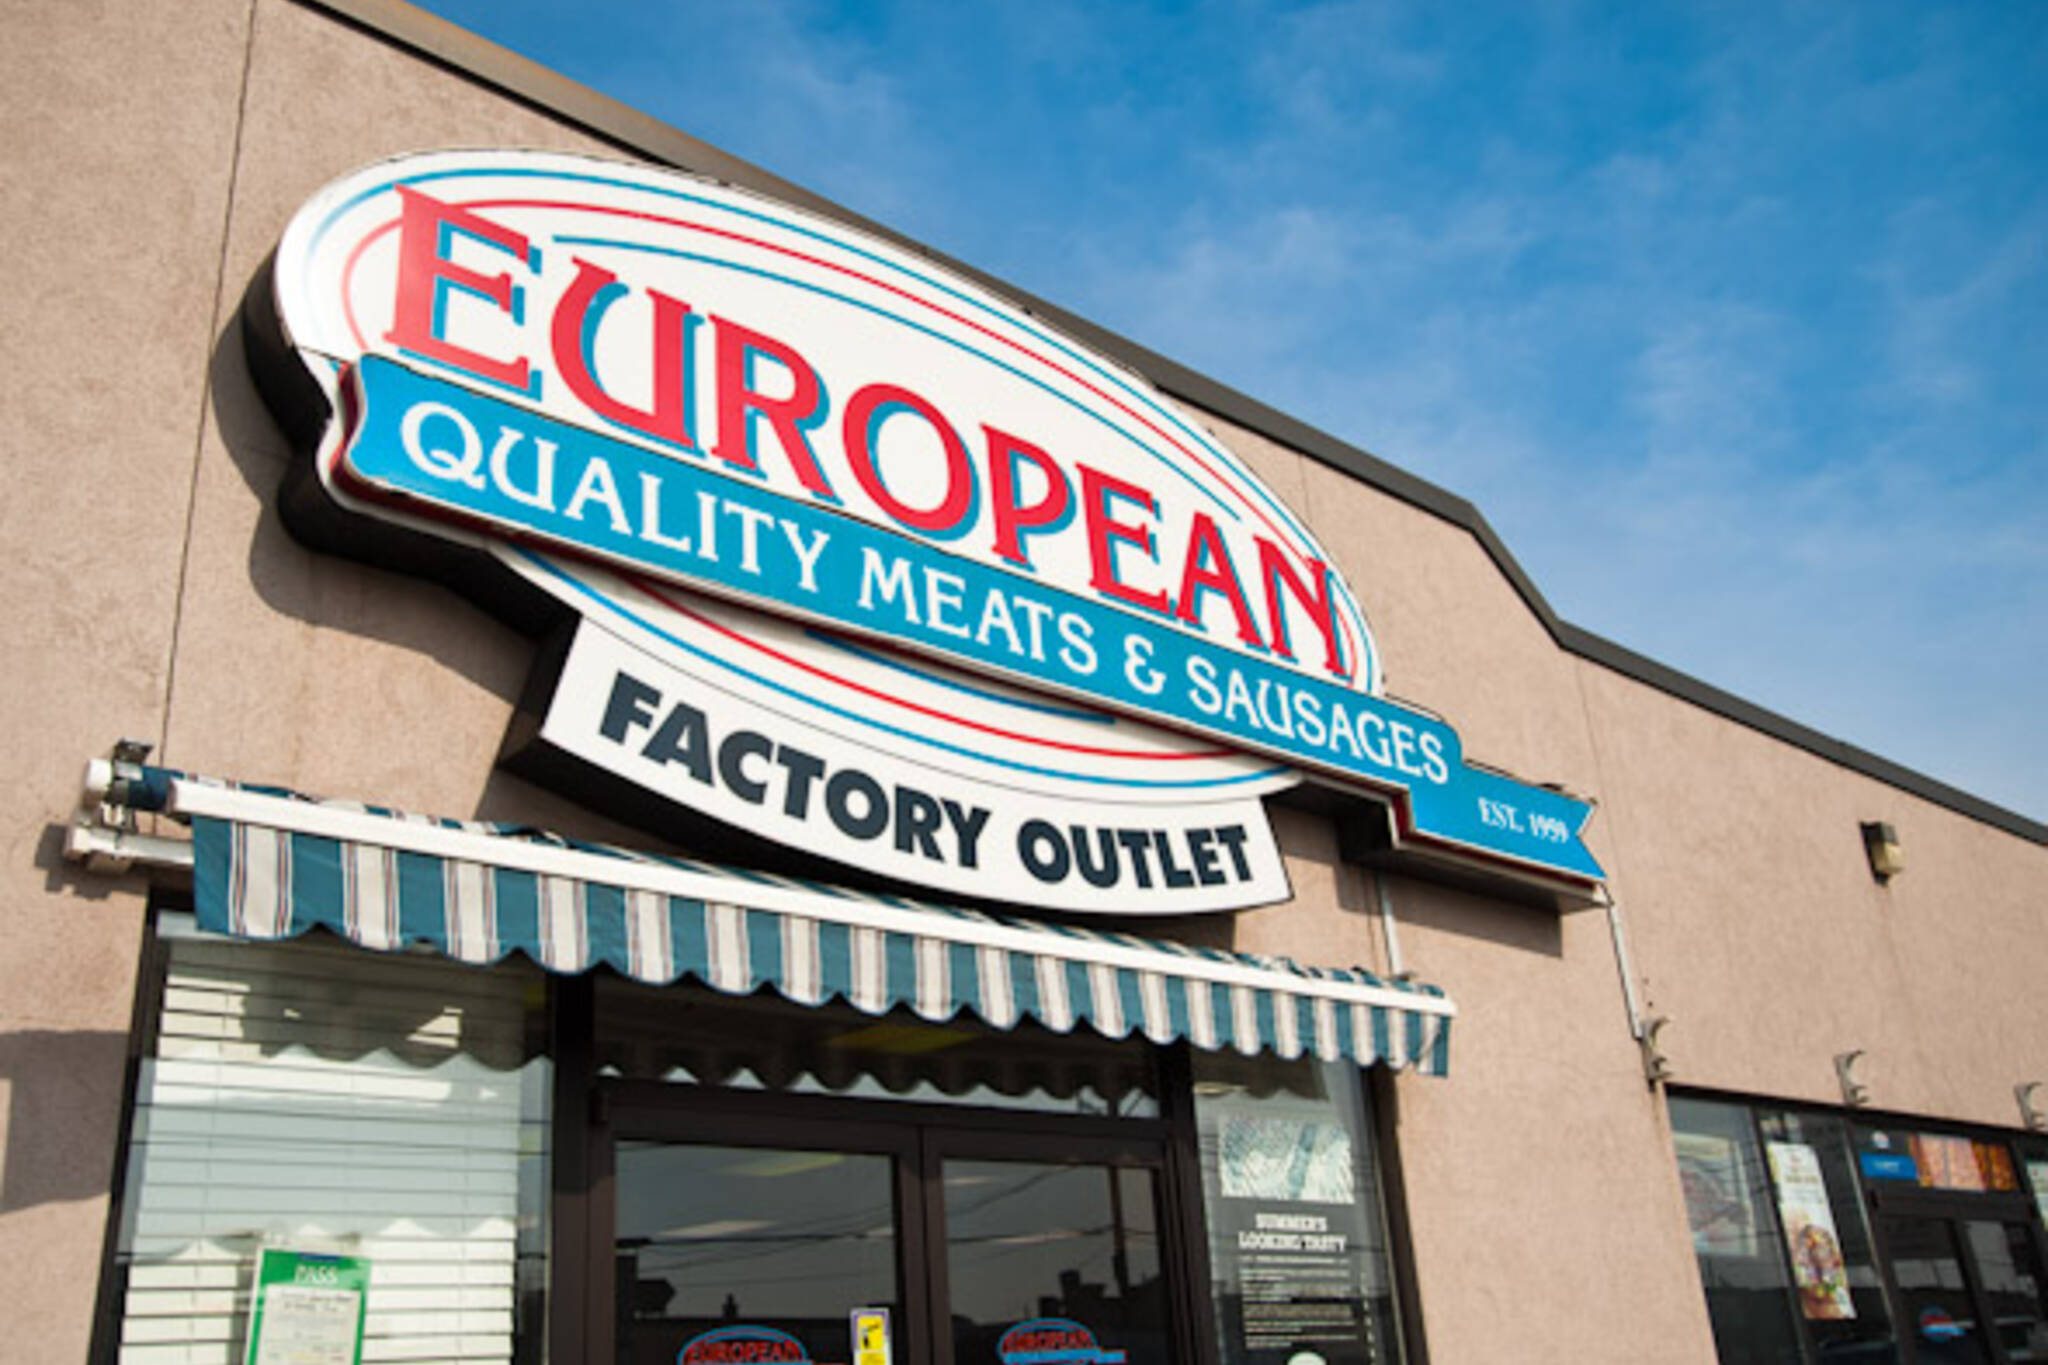 European Quality Meats Torontocloses